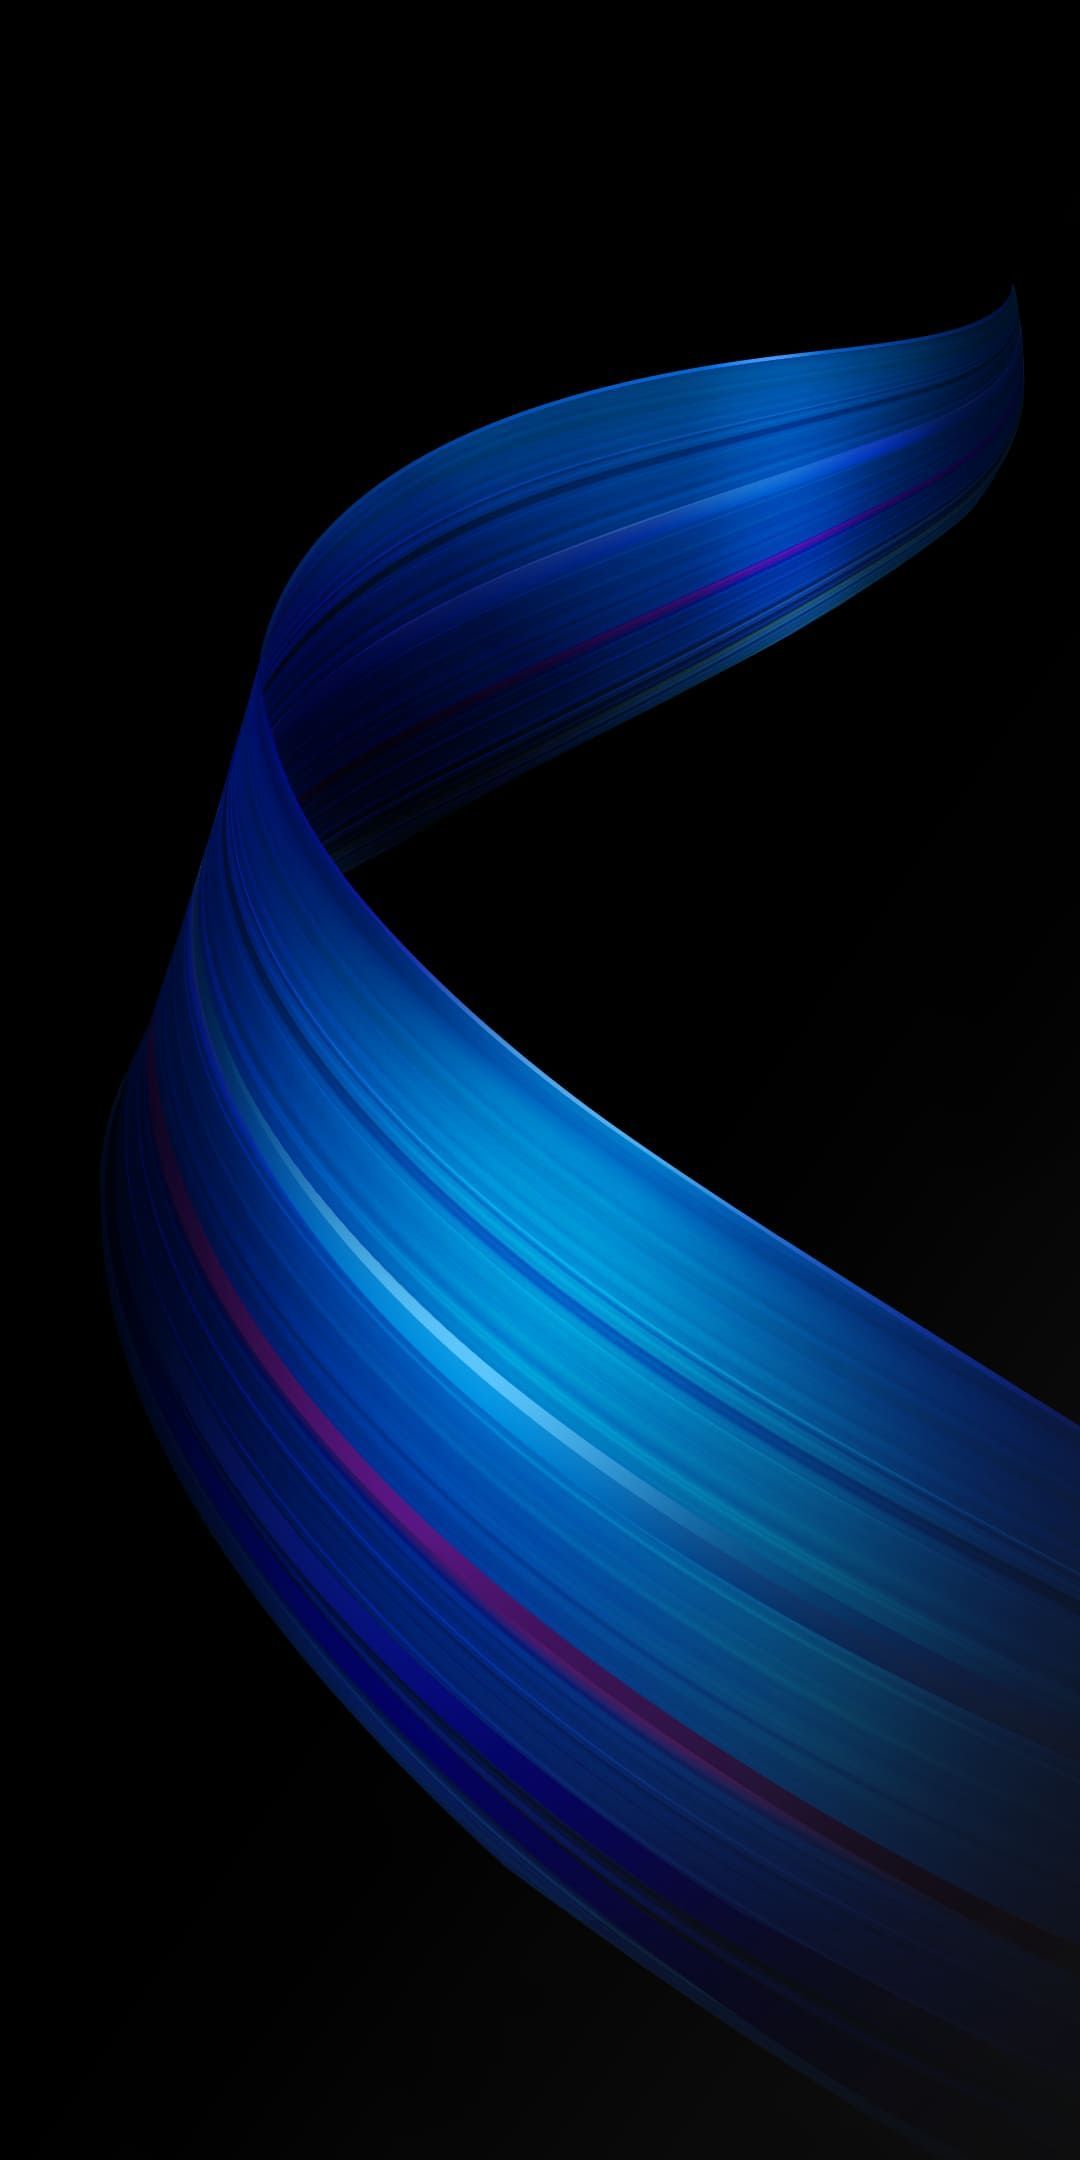 New Oppo wallpaper Perfect for my iPhone XS  riphonewallpapers